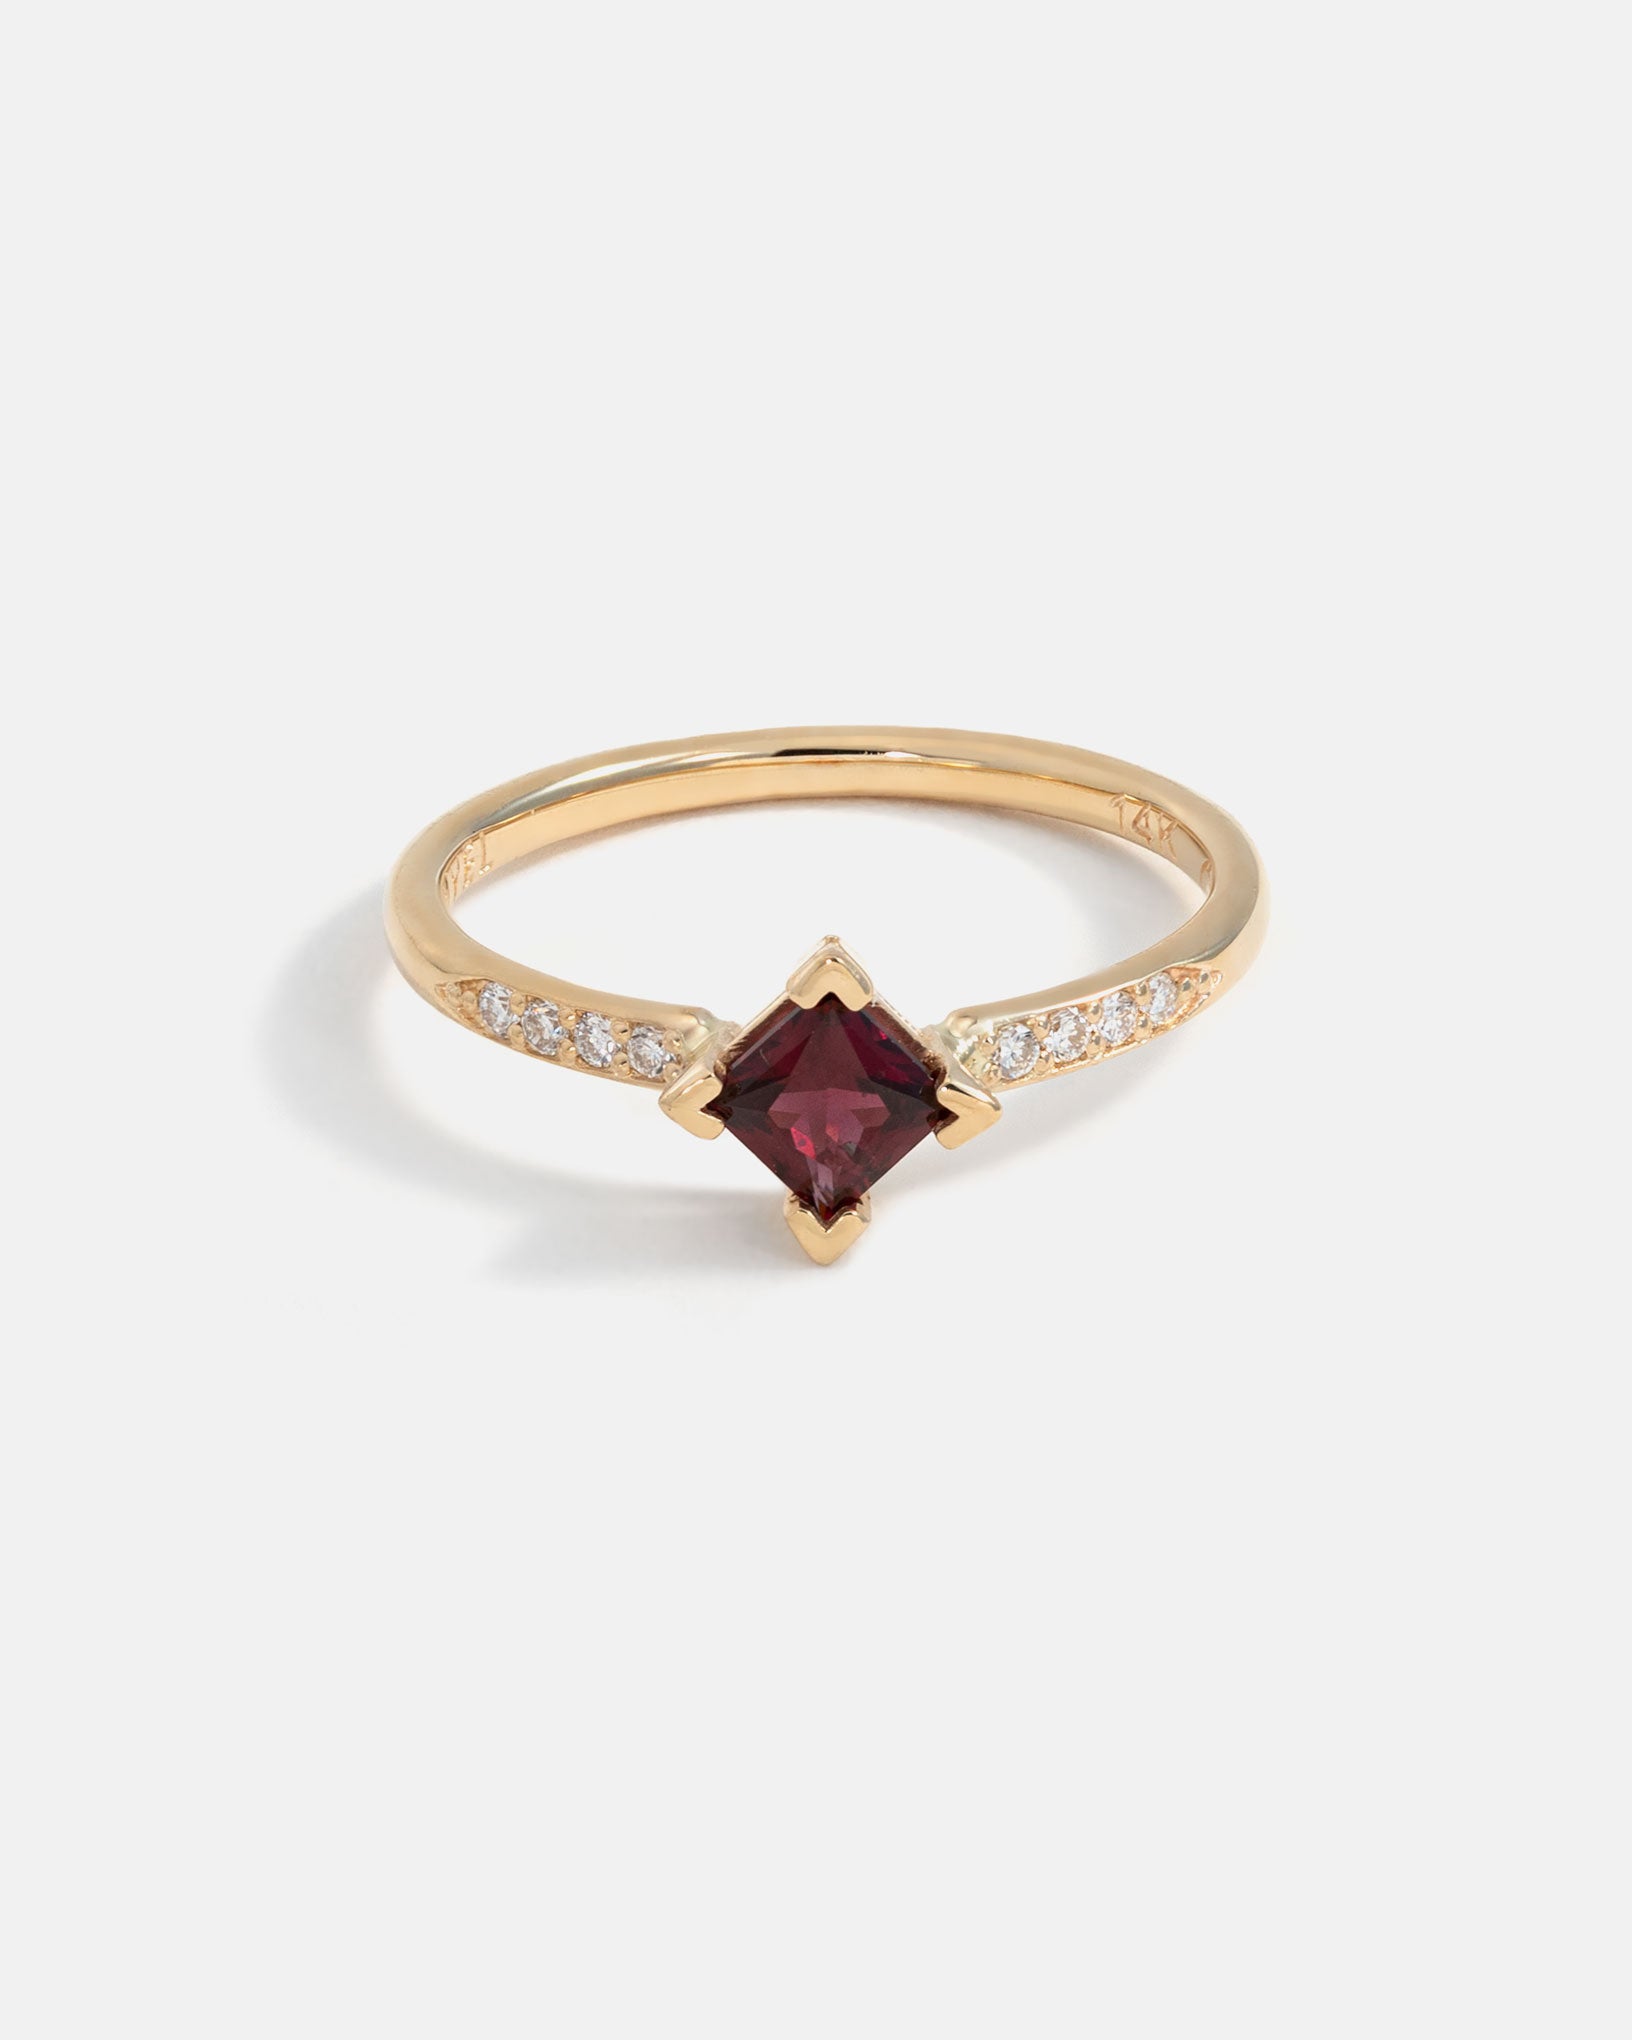 Harmony Ring in 14k Fairmined Gold with Anthill Garnet and lab grown Diamonds